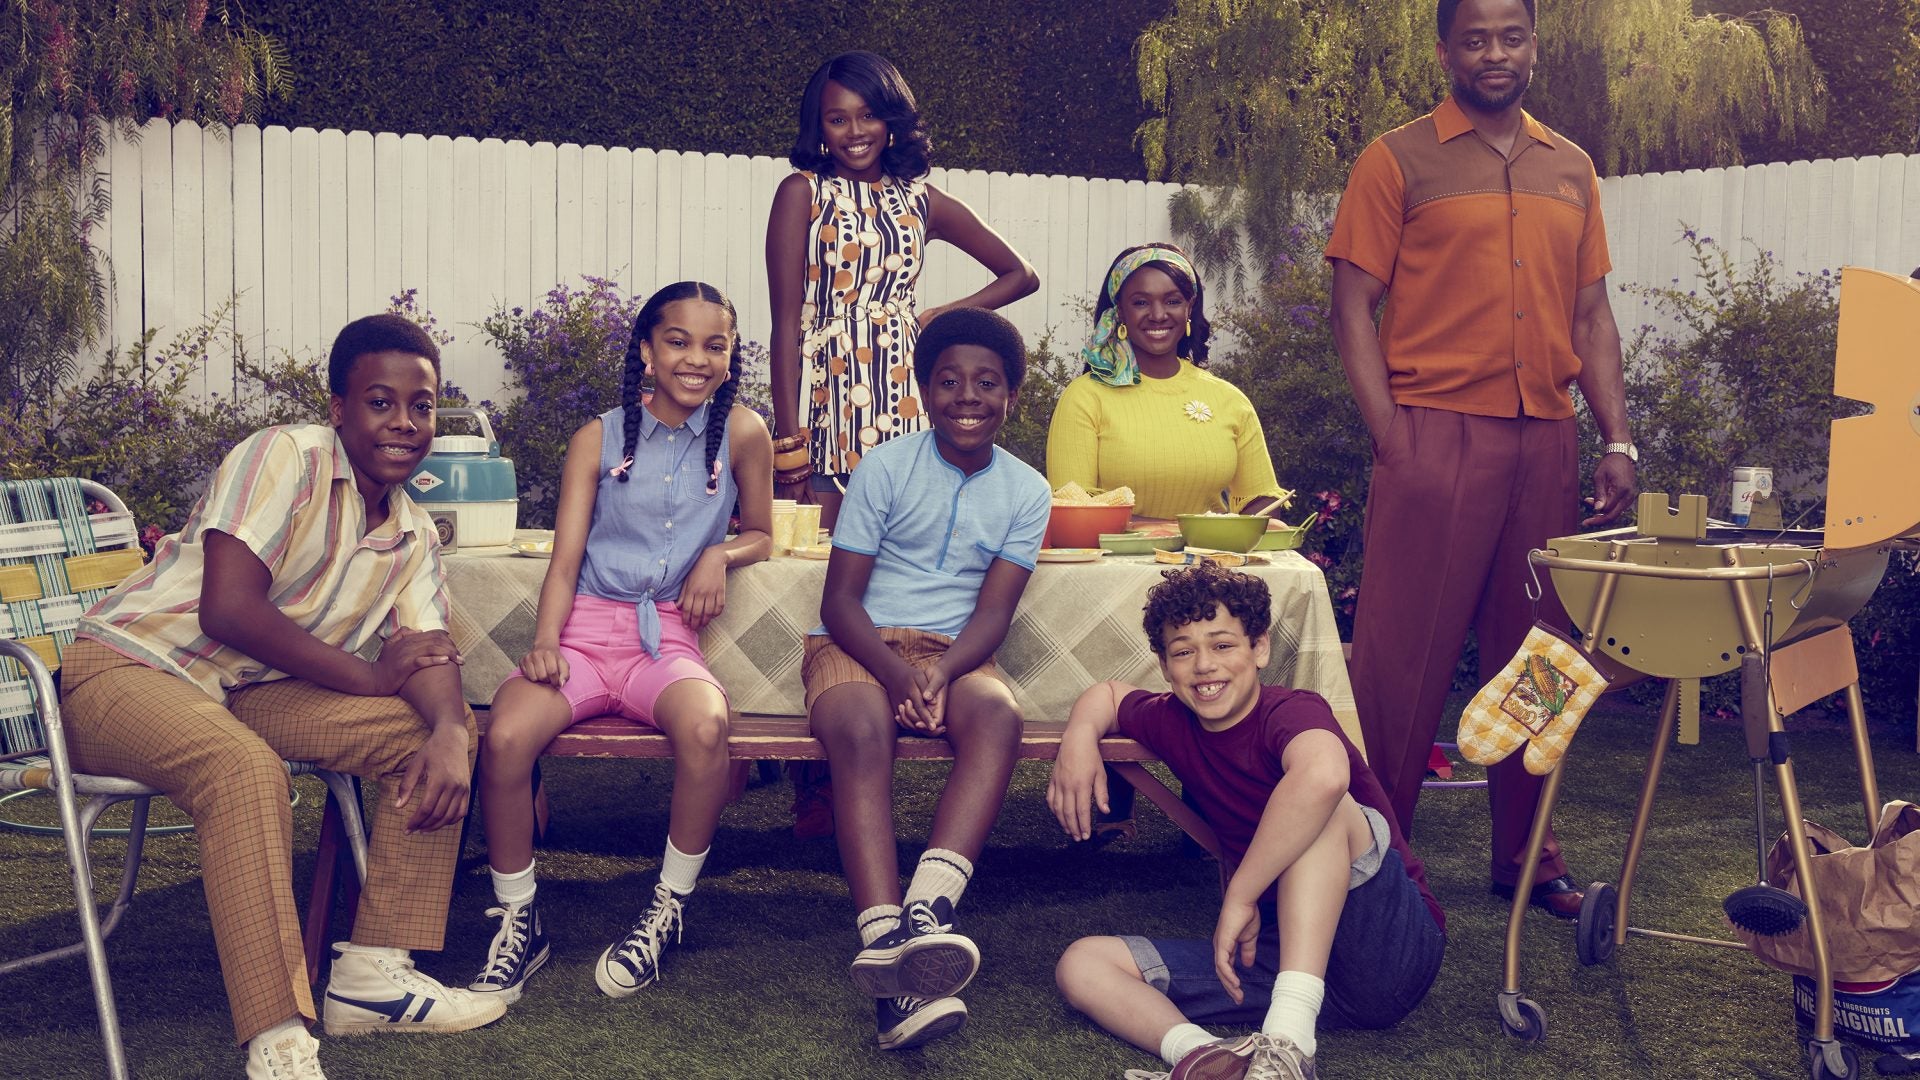 Exclusive: Take A First Look At The Beautiful Black Family In 'The Wonder Years'